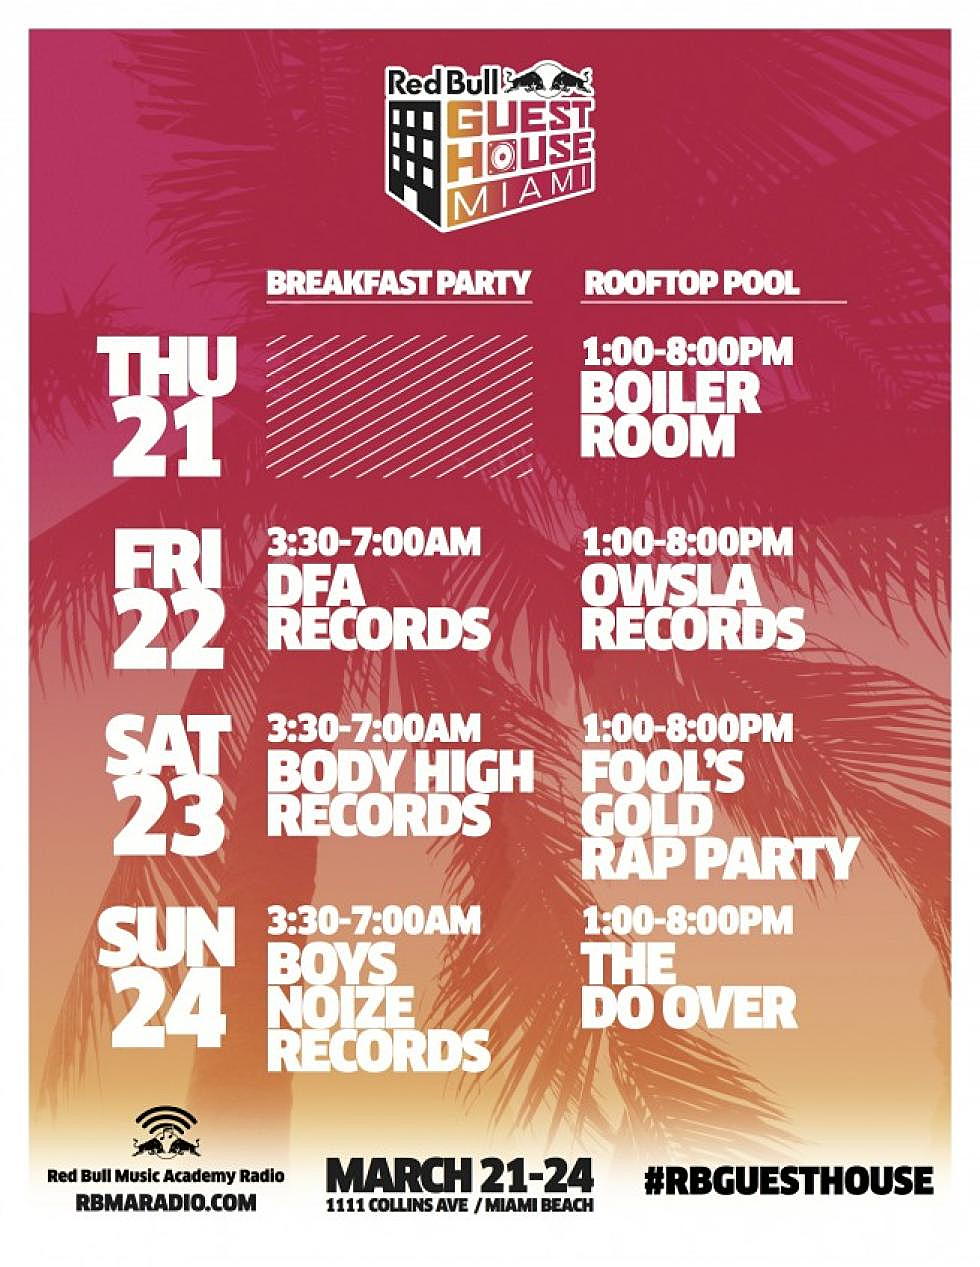 Red Bull Guest House Miami March 21-24